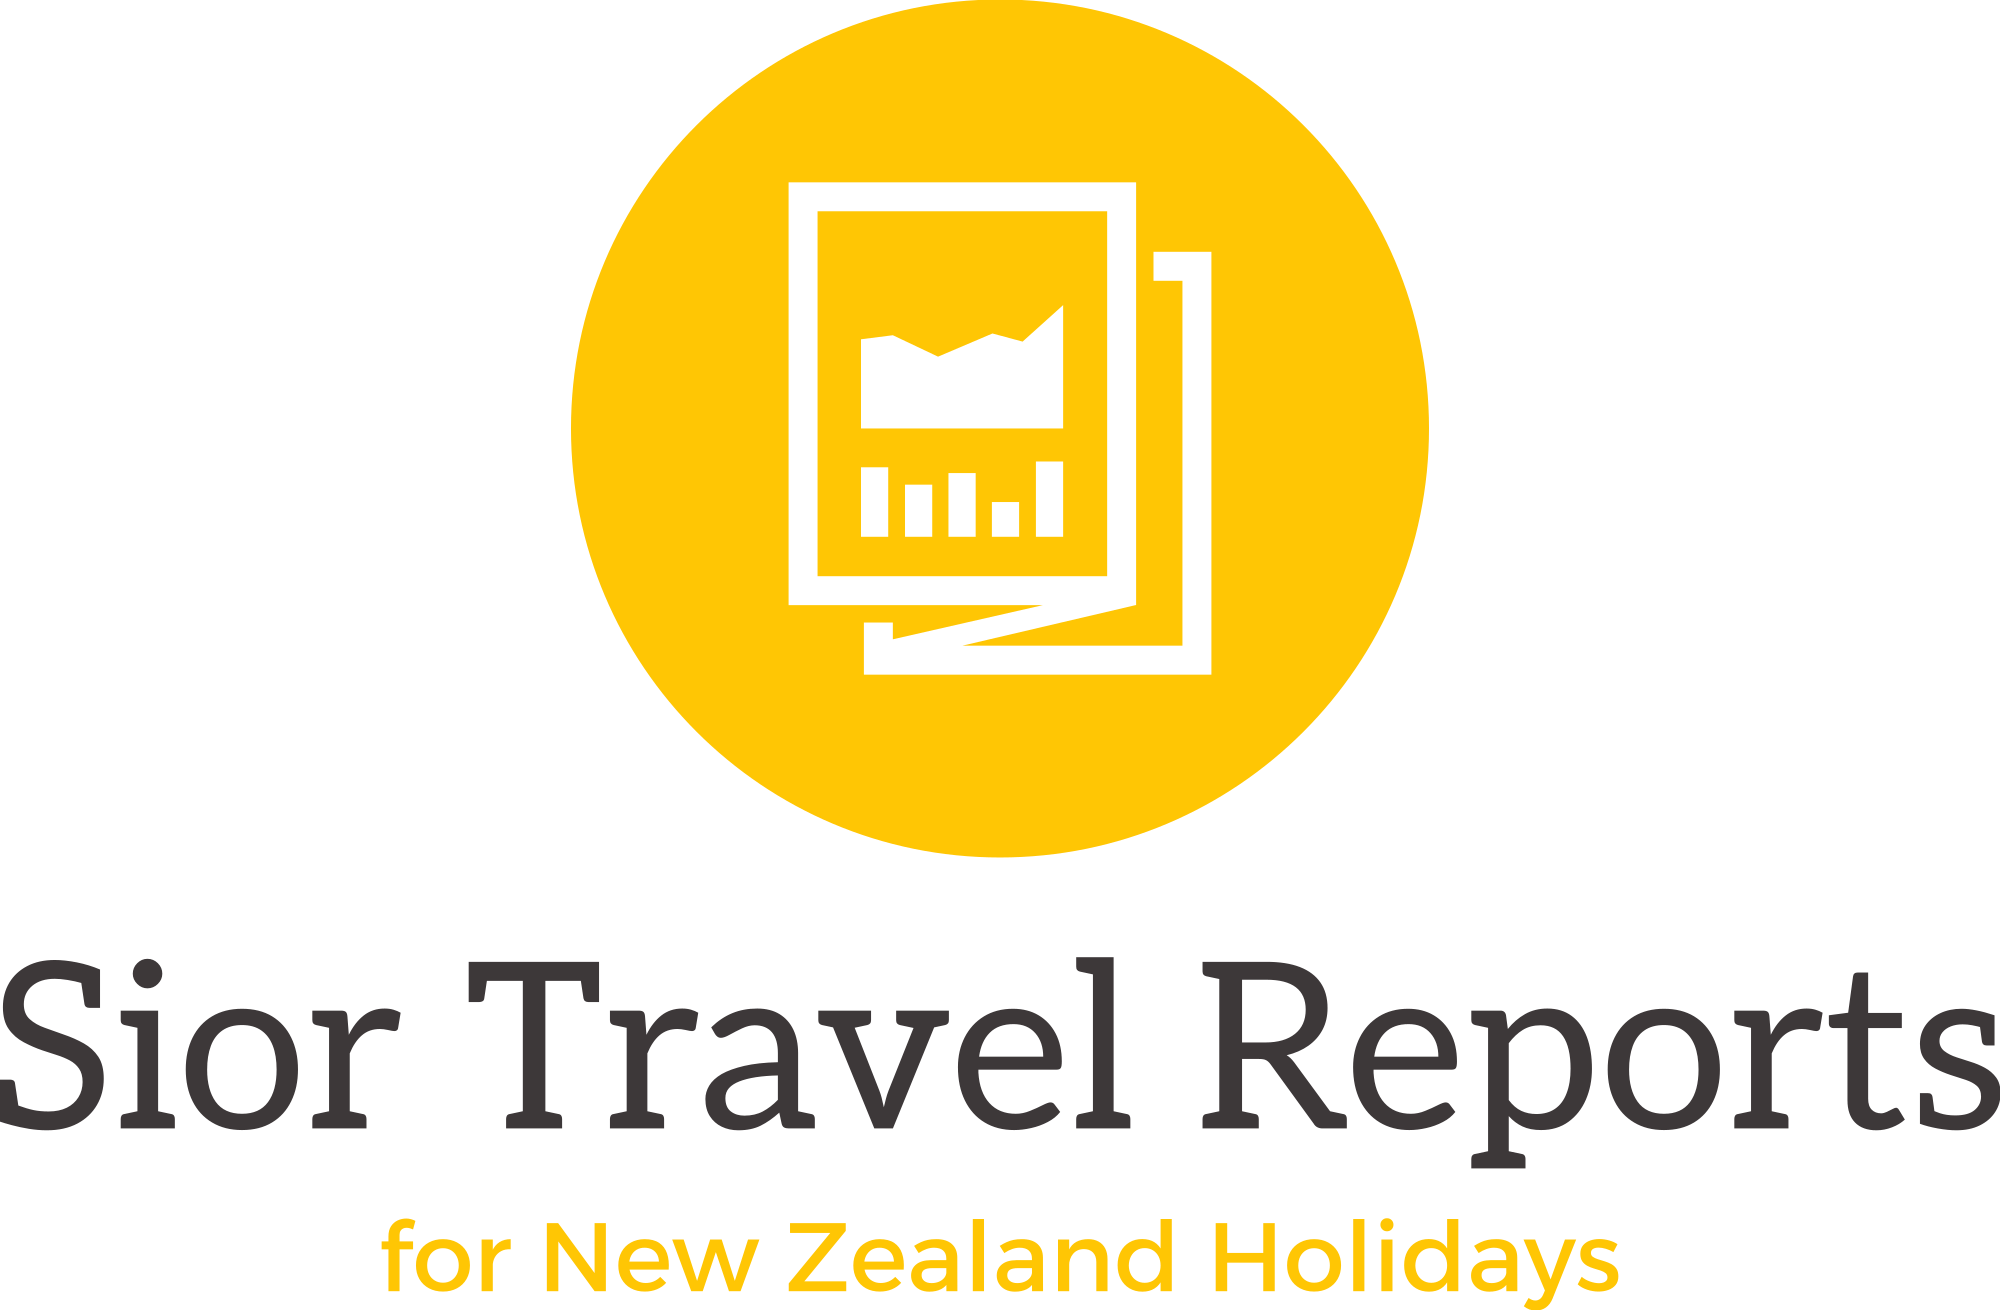 Sior Travel Report for New Zealand Holidays